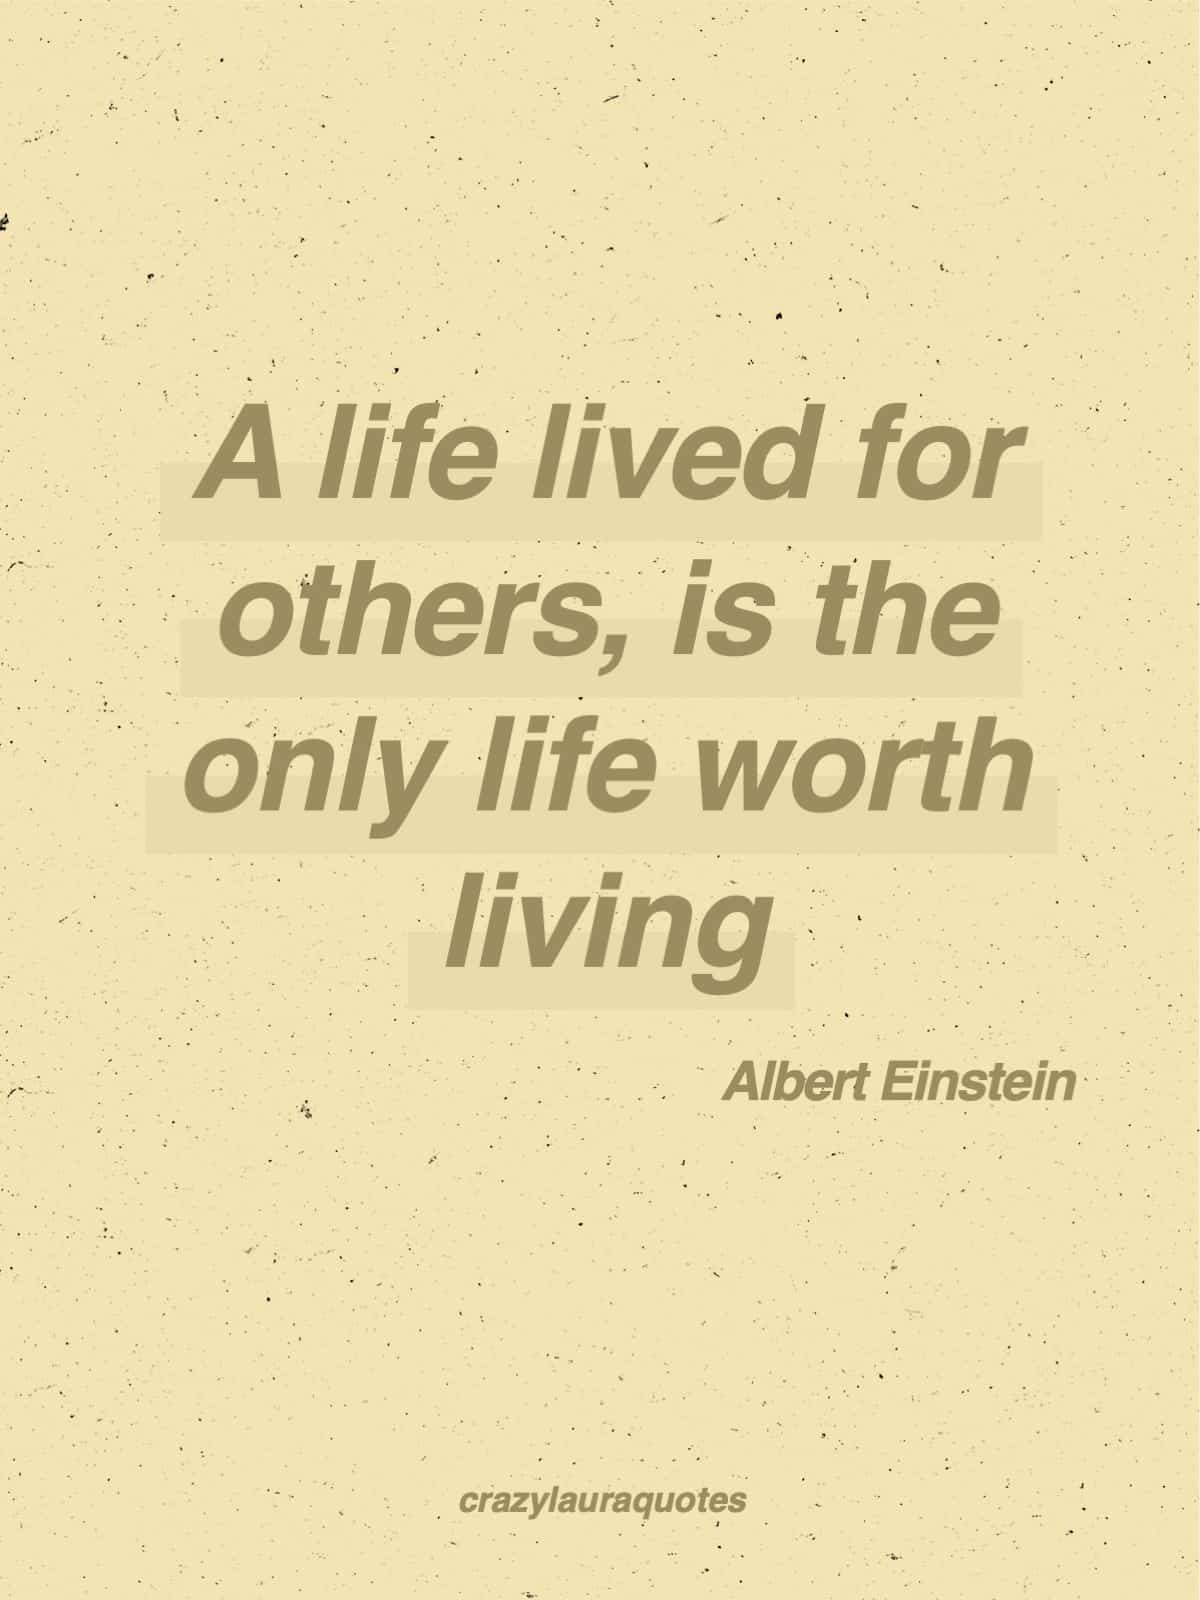 life is worth living for others albert einstein